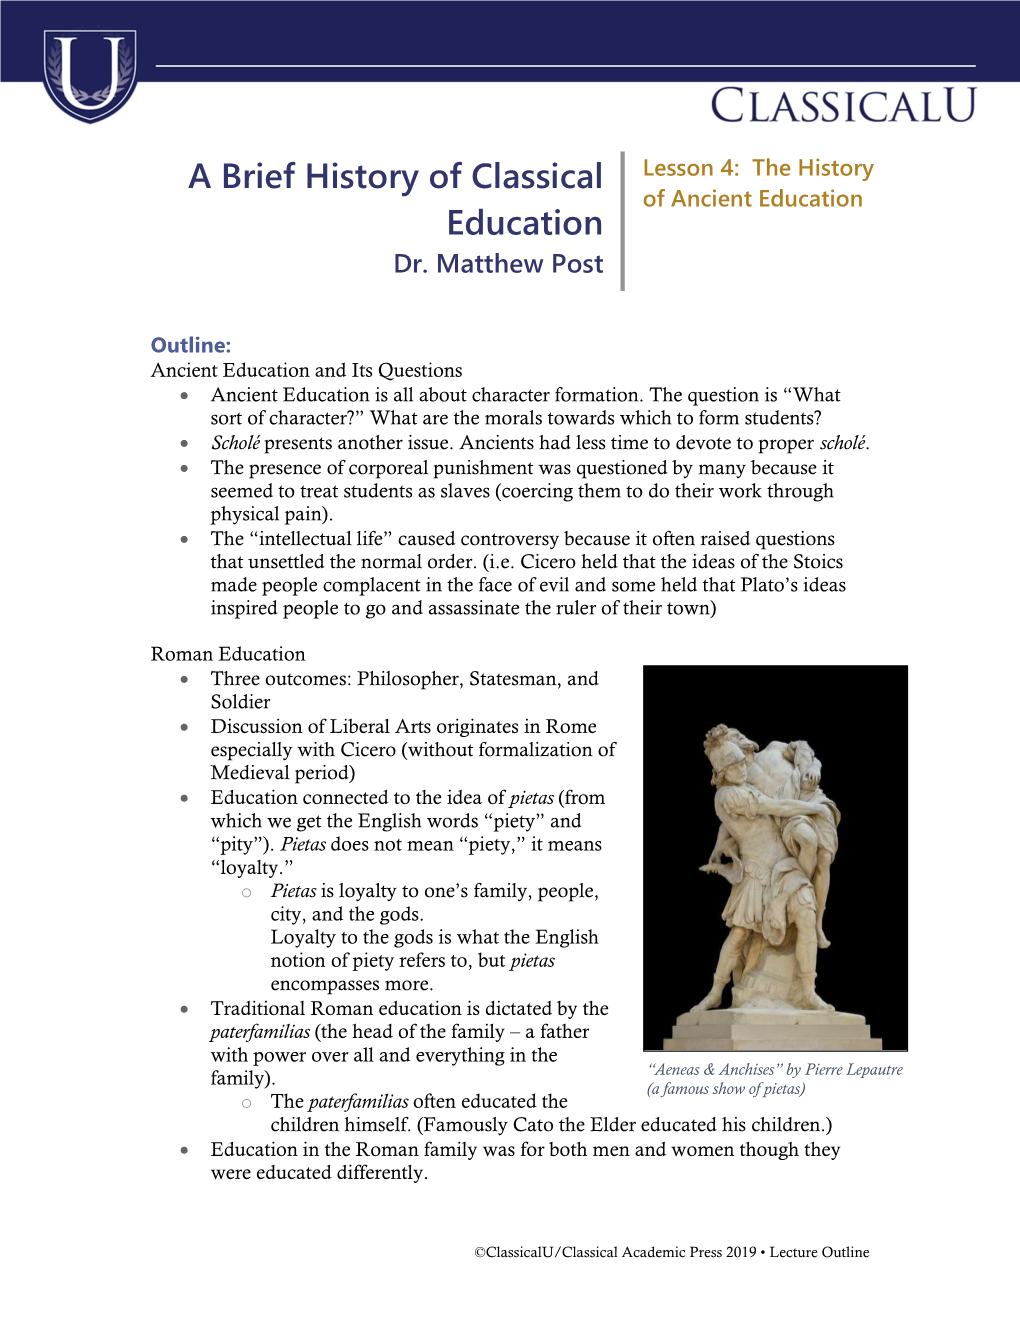 A Brief History of Classical Education